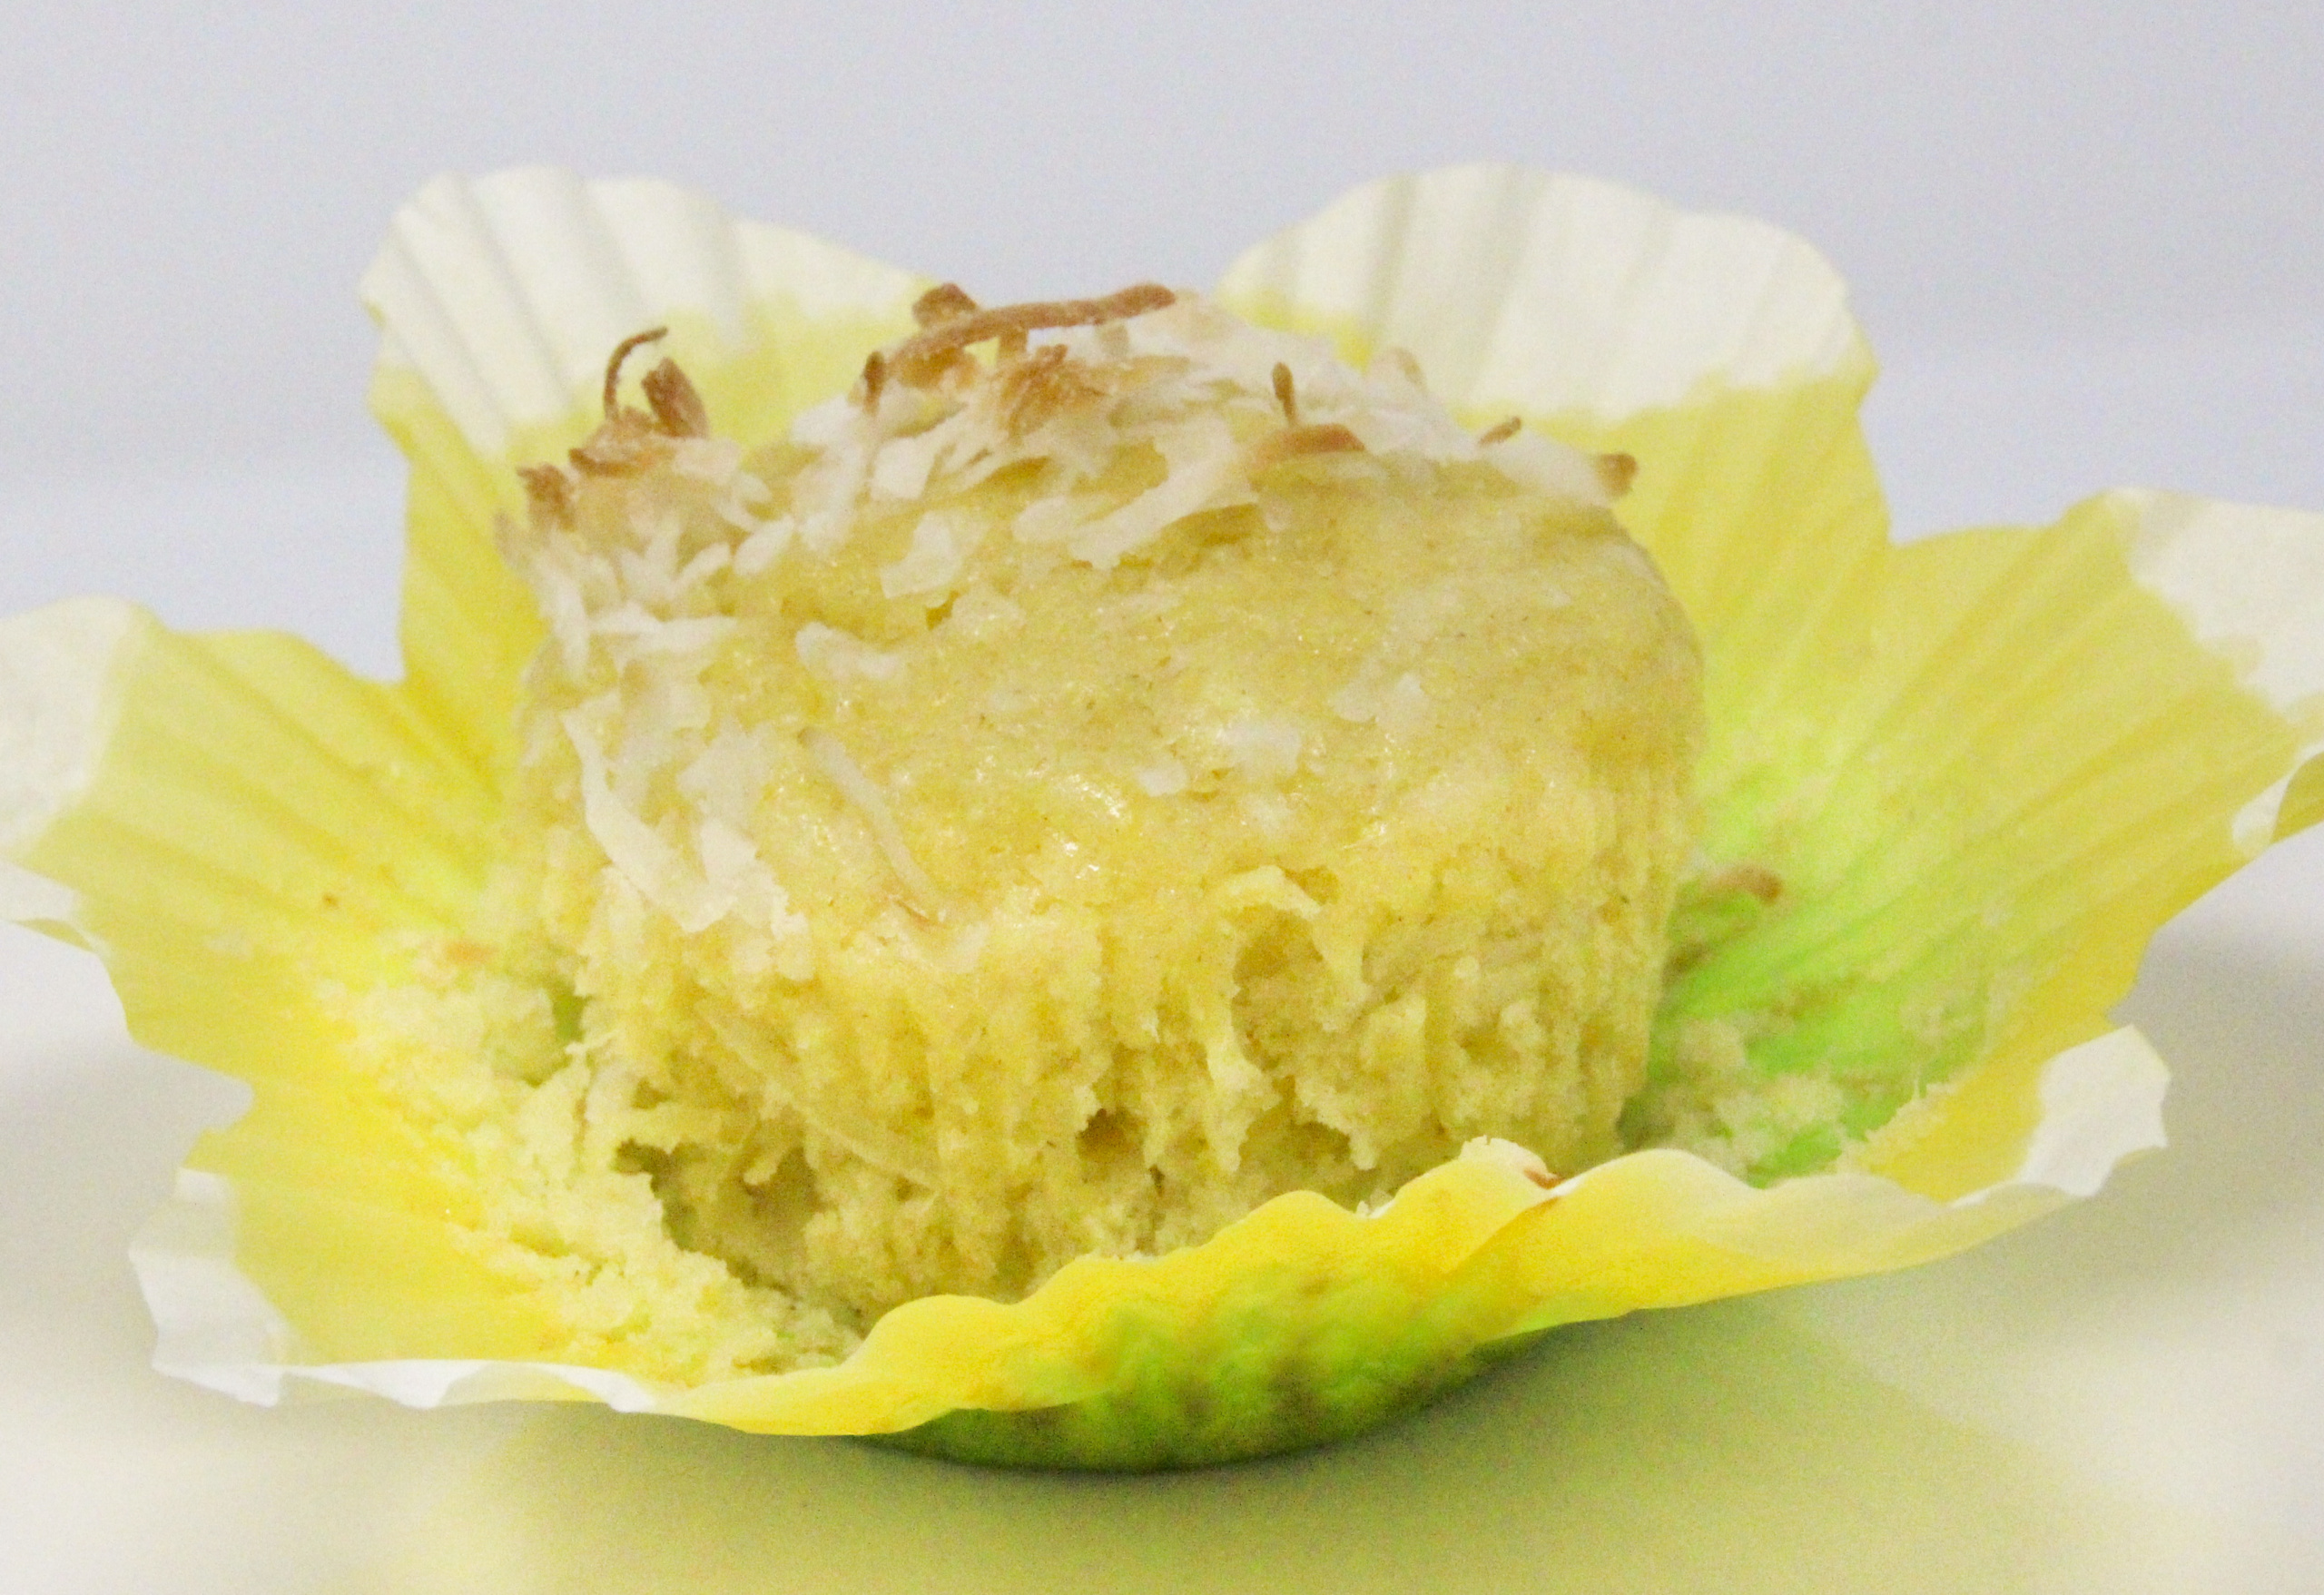 Tropical Pineapple Muffins are moist and flavorful thanks to the generous amount of pineapple. These muffins will have you dreaming of sunny days and tropical isles on chilly winter mornings! Recipe shared with permission granted by Kim Davis, contributing author for The Secret Ingredient: The Mystery Writers' Cookbook.